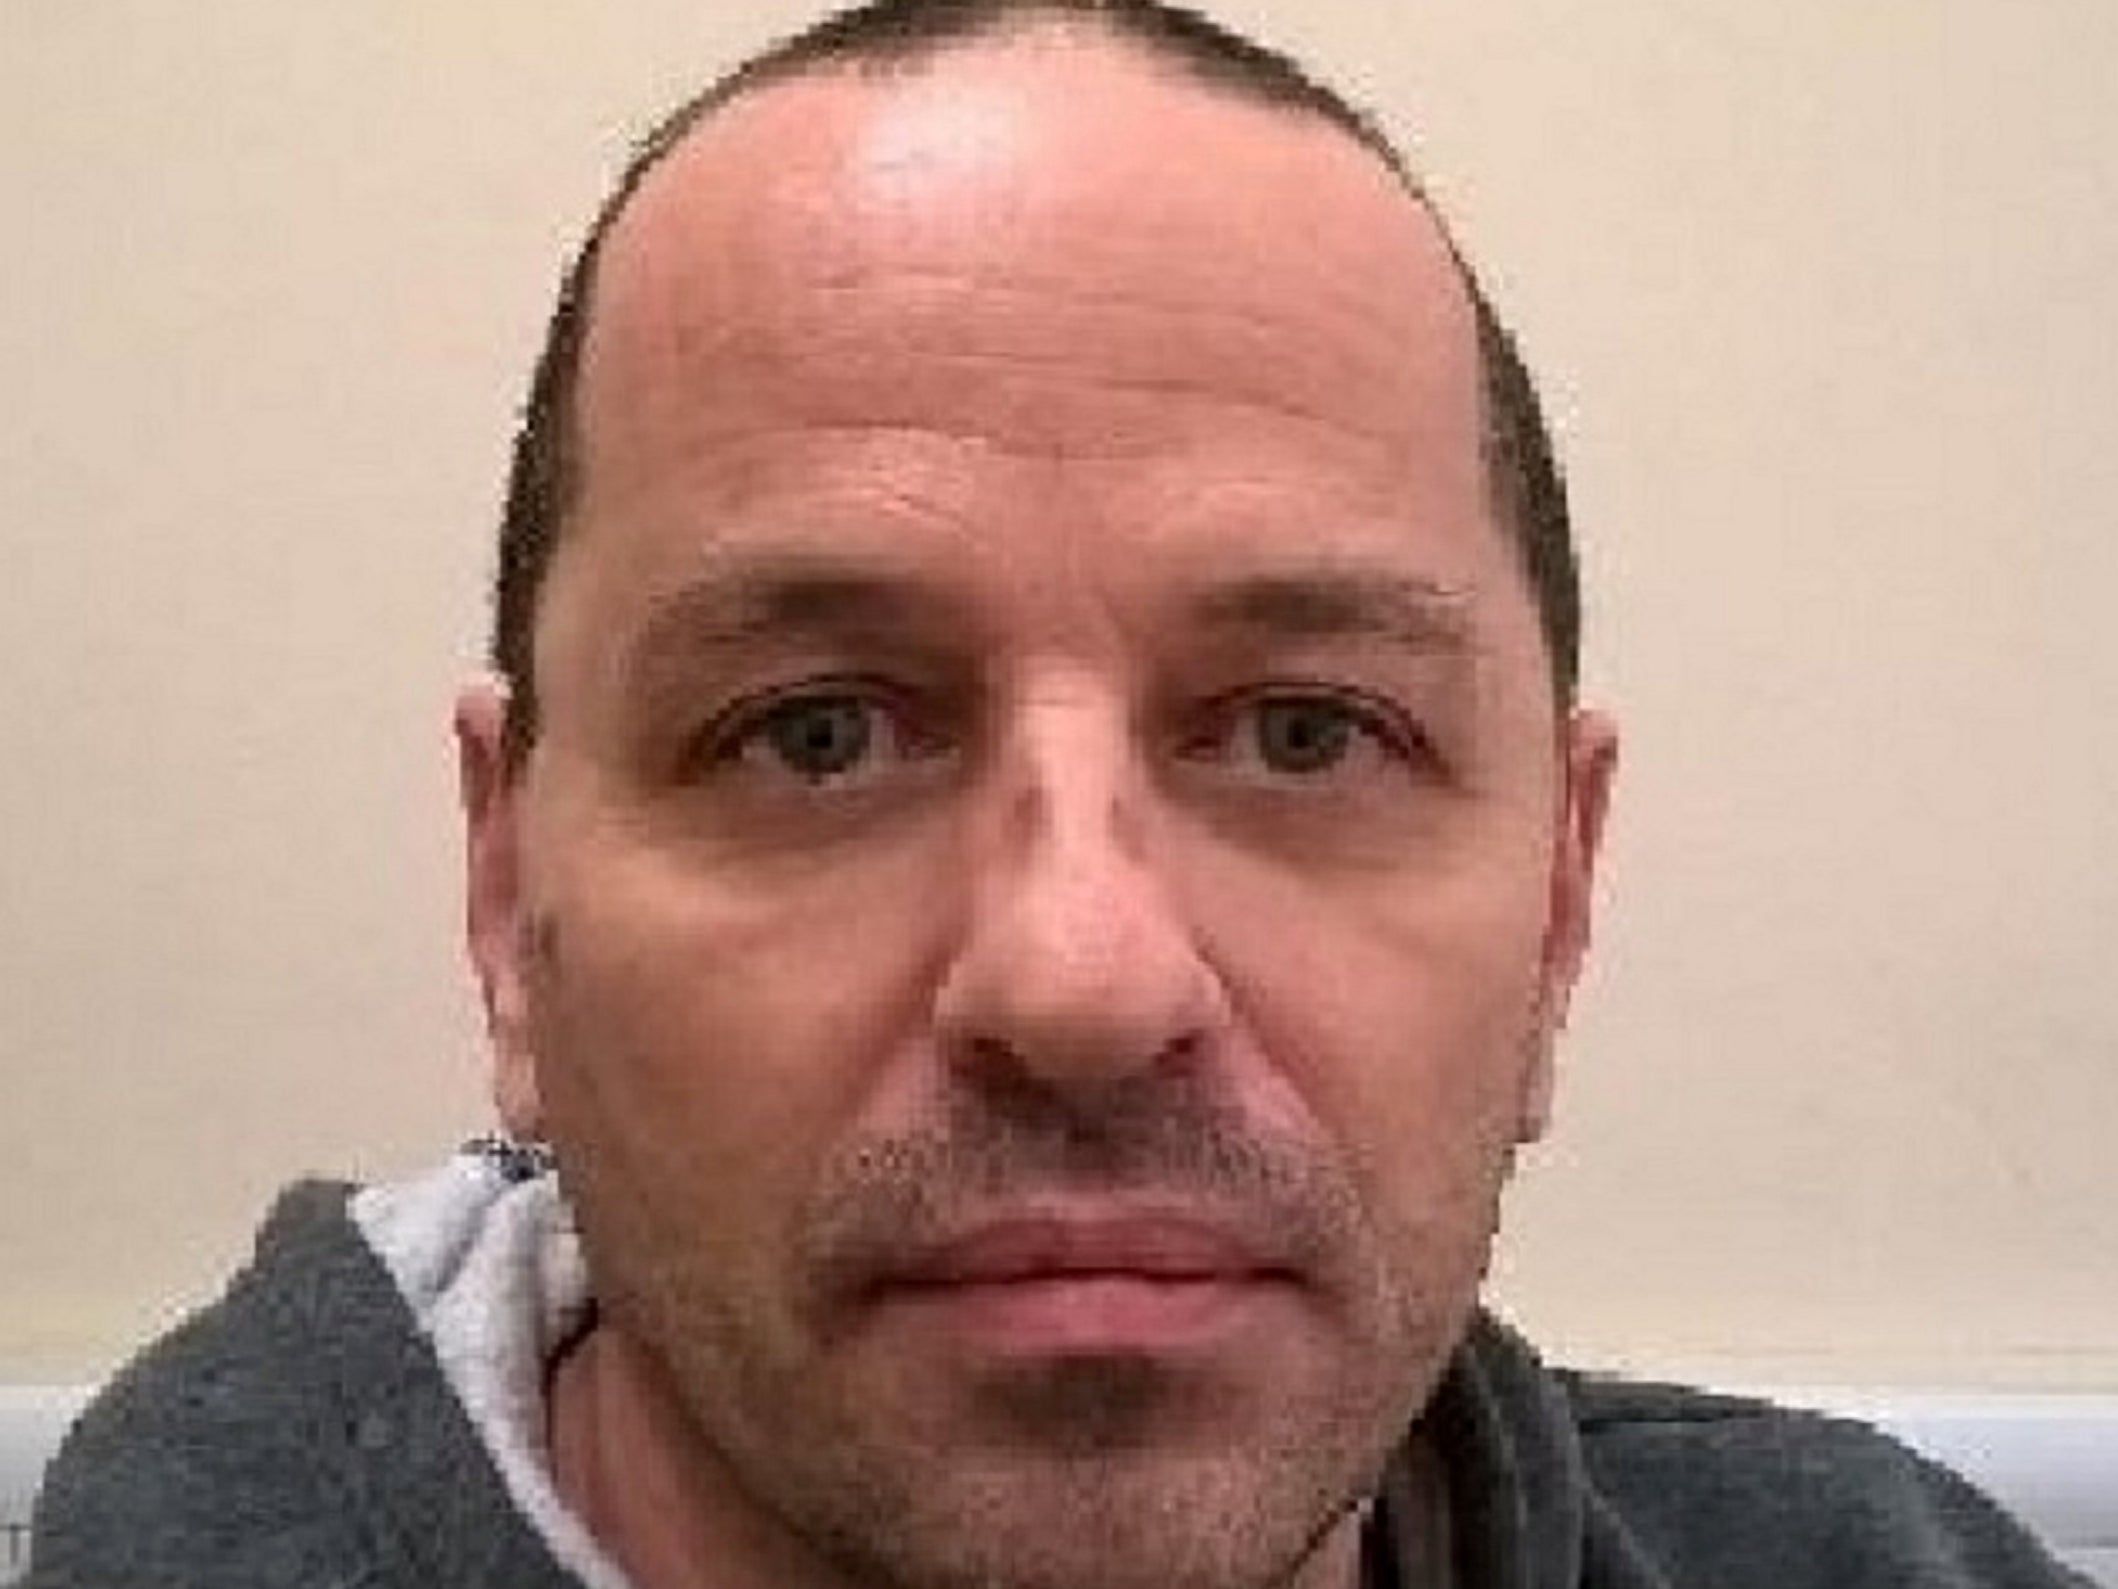 Prime suspect Neil Maxwell was a wanted and previously convicted sex offender who killed himself while on the run from police in April 2019, two months after Ms Croucher vanished